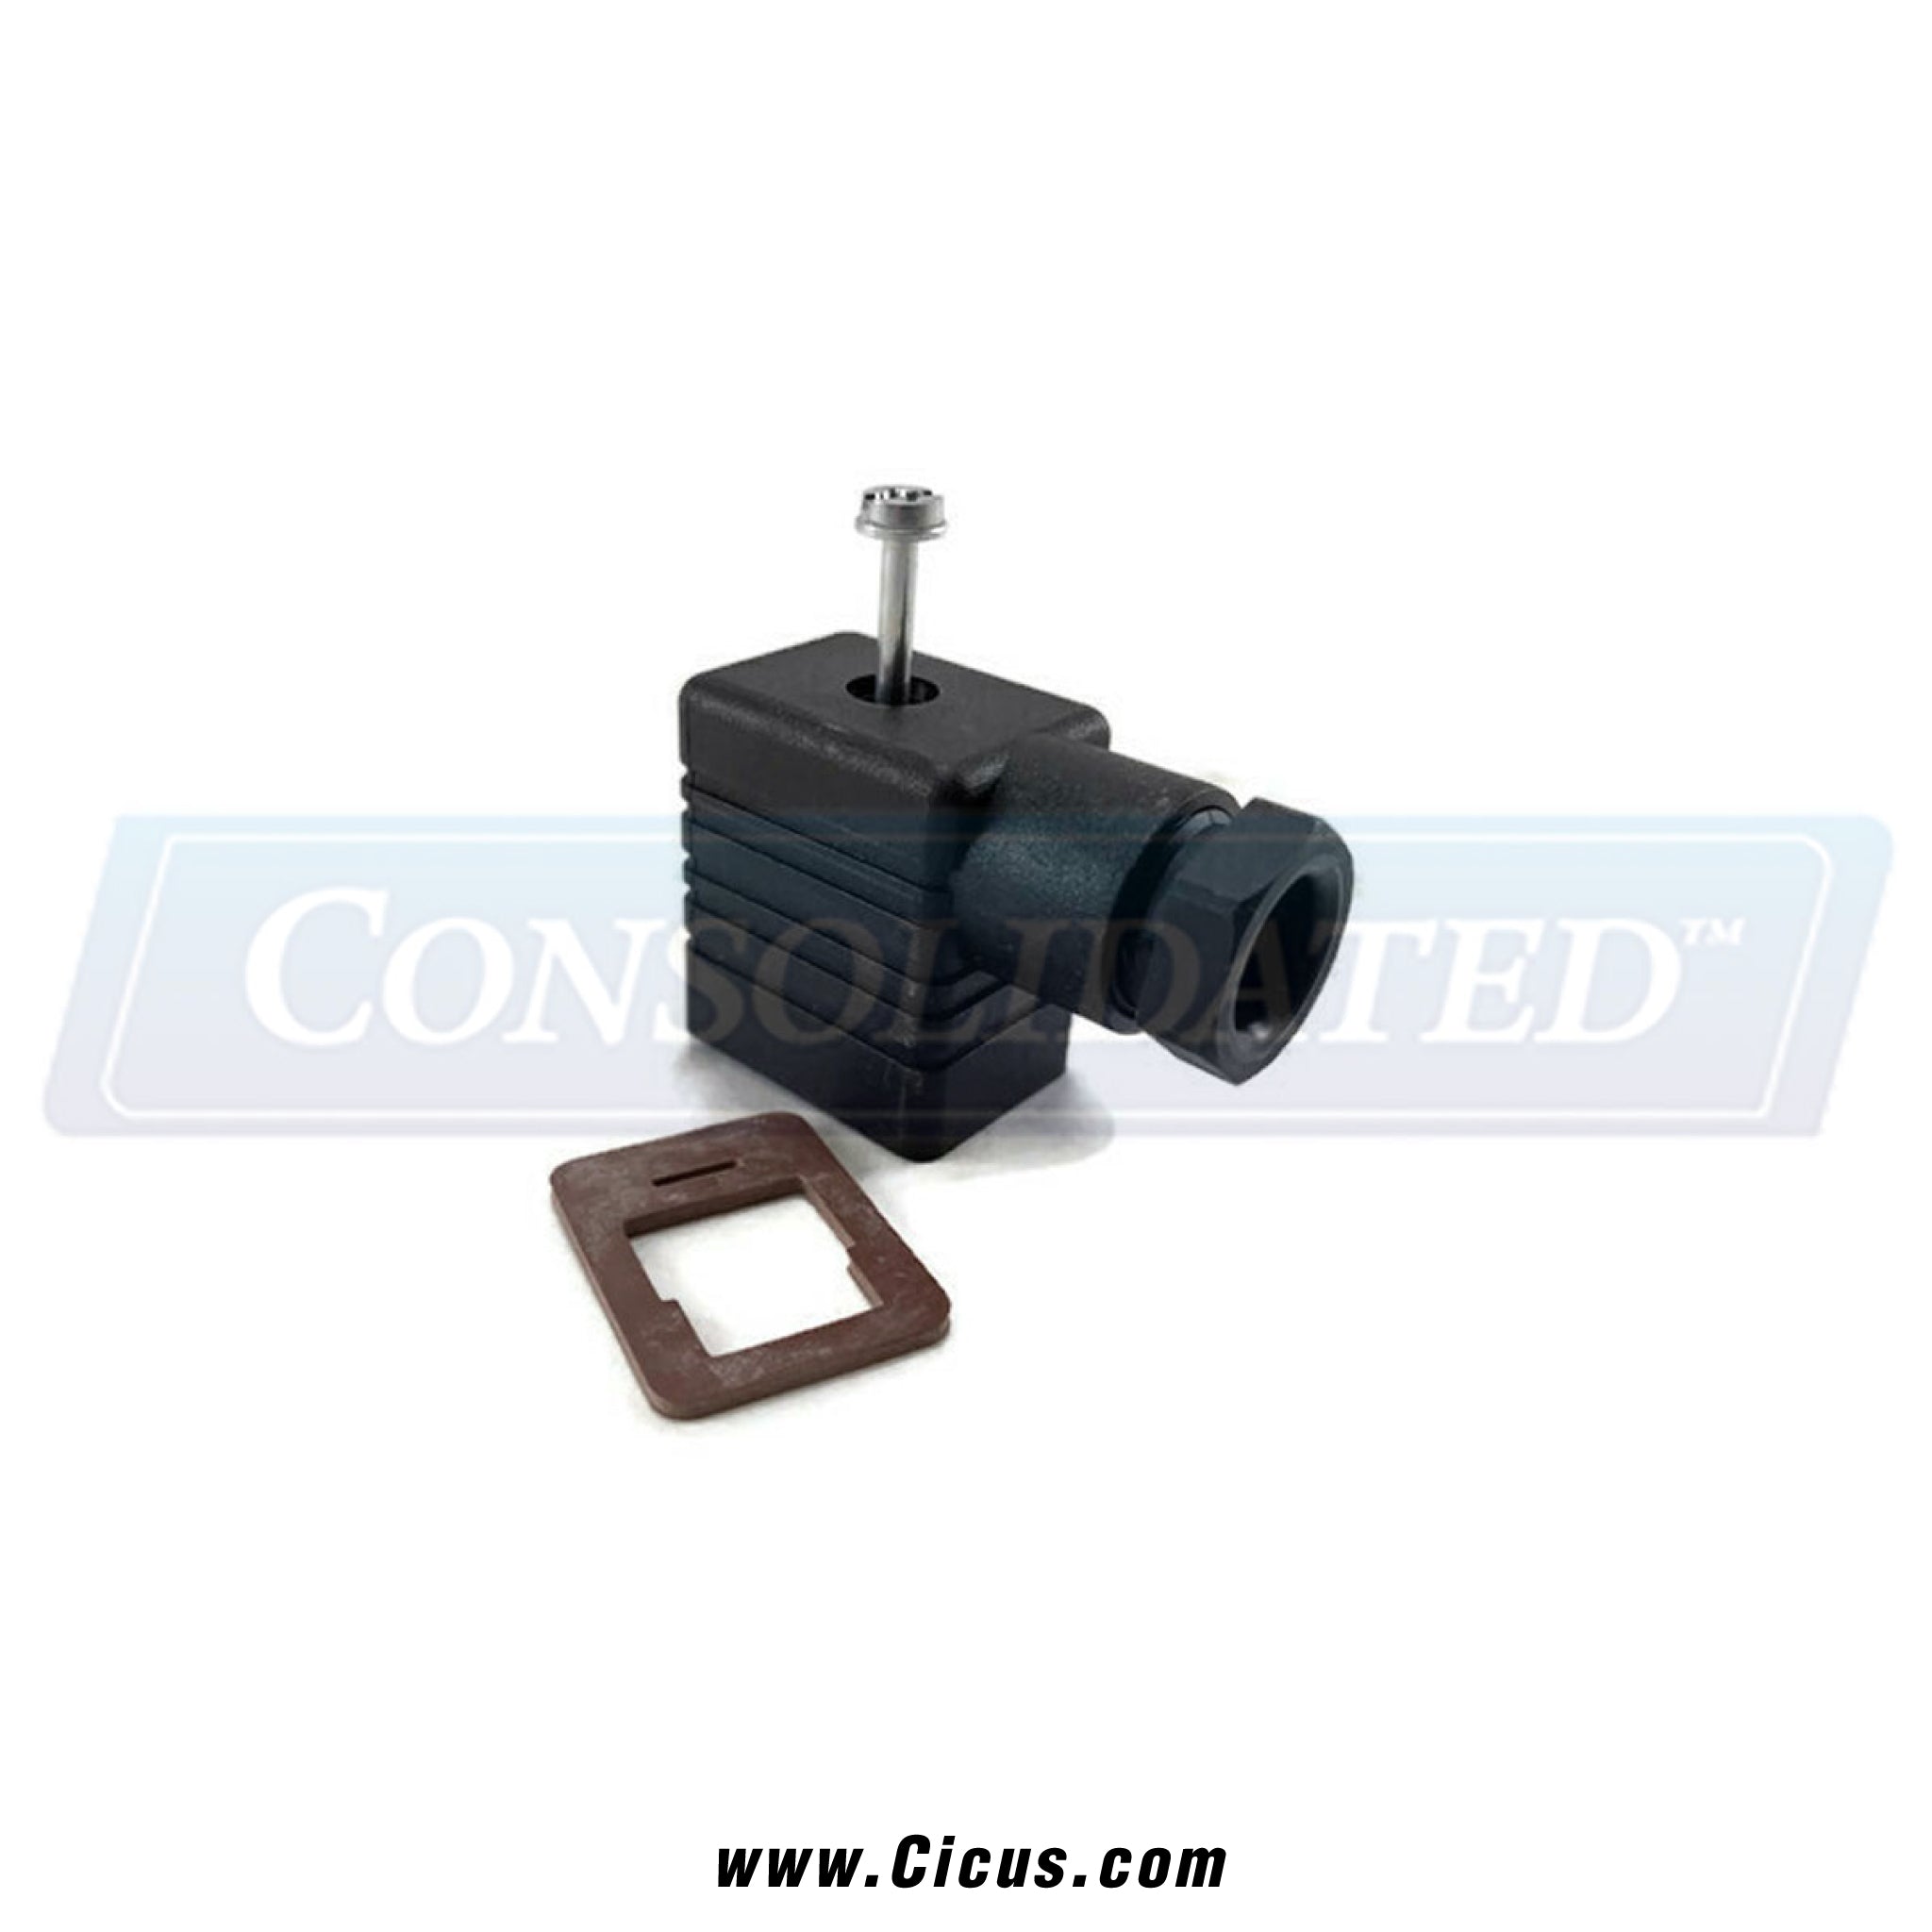 Burkert Cable Plug for Valves with Industrial Form B Connection [423845]